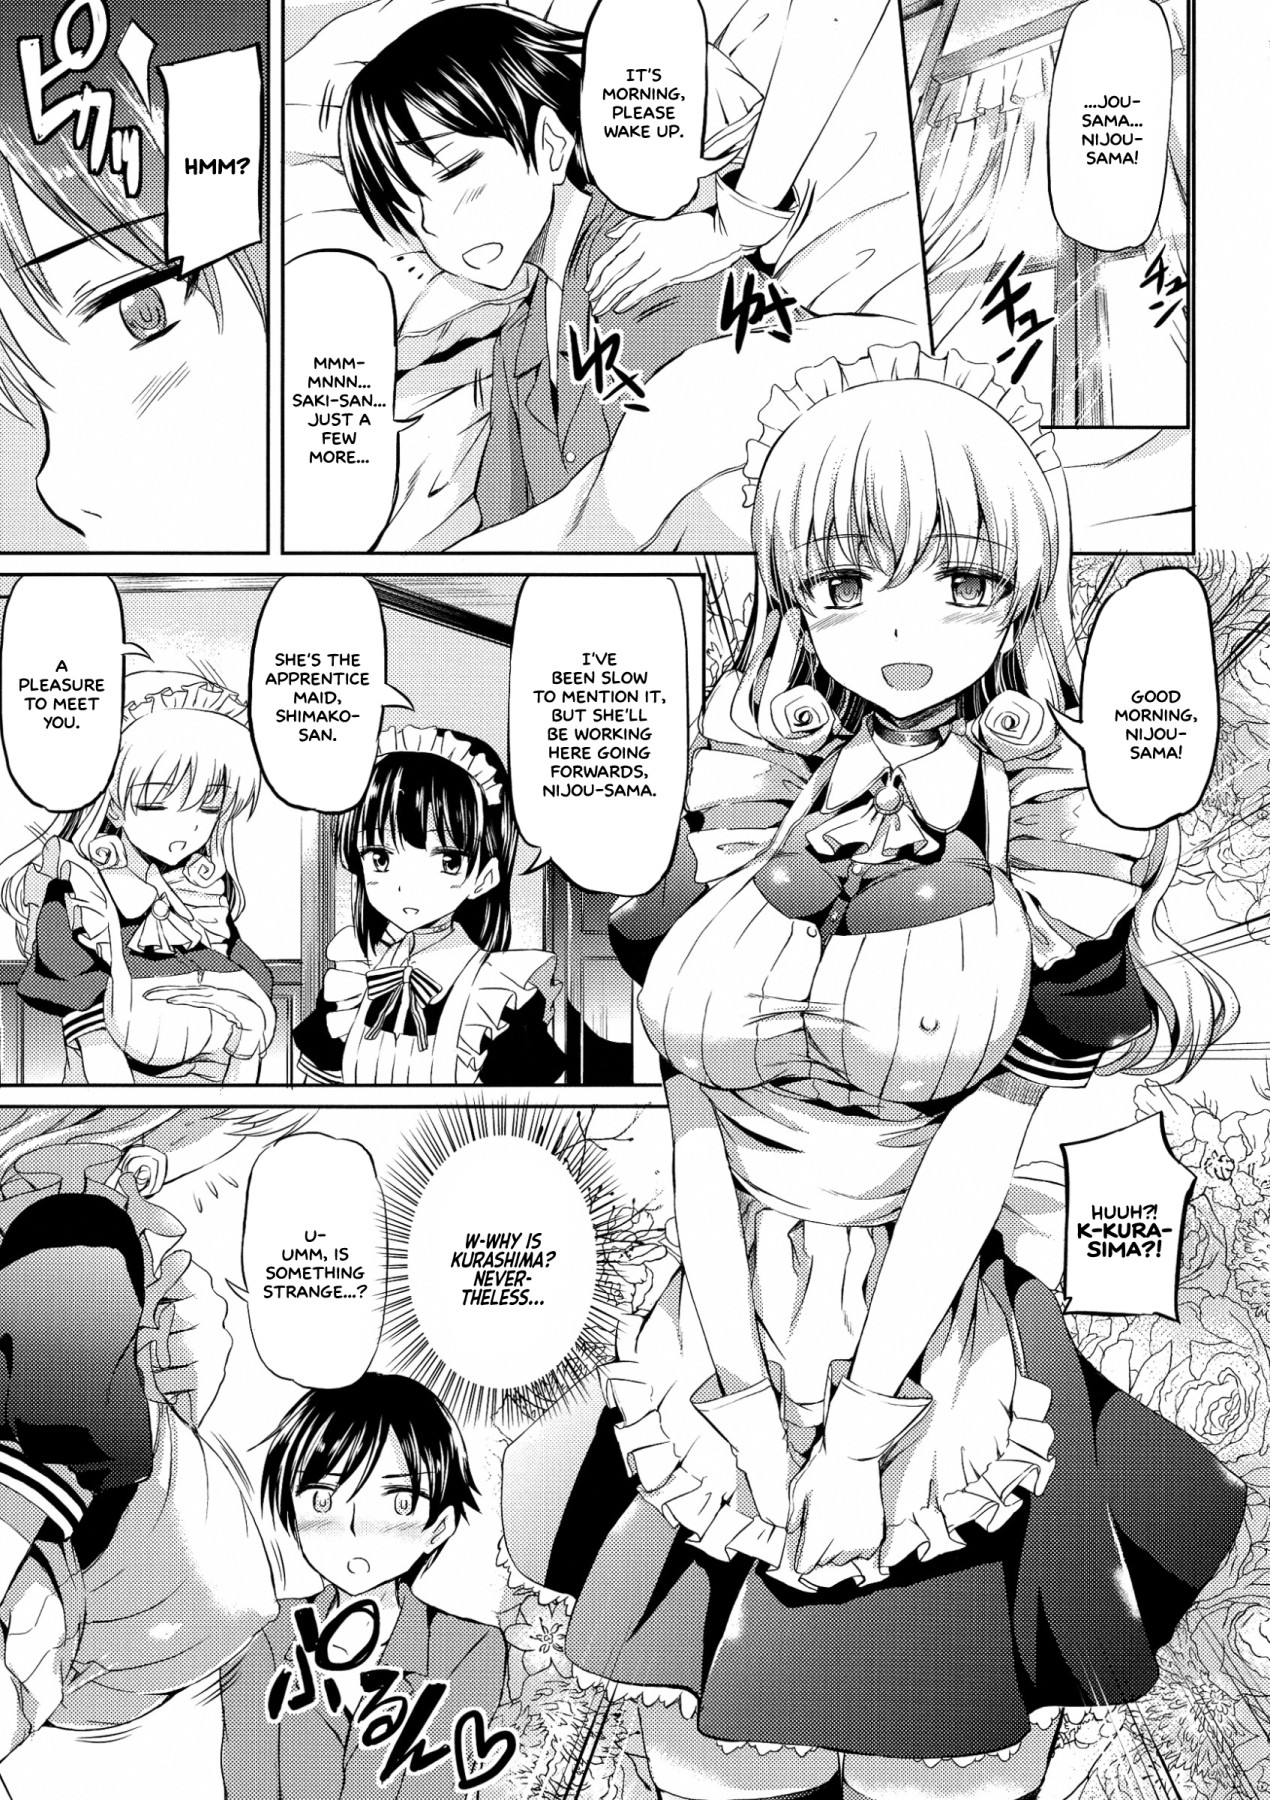 Hentai Manga Comic-The Young Lady's Maid Situation-Chapter 9-3